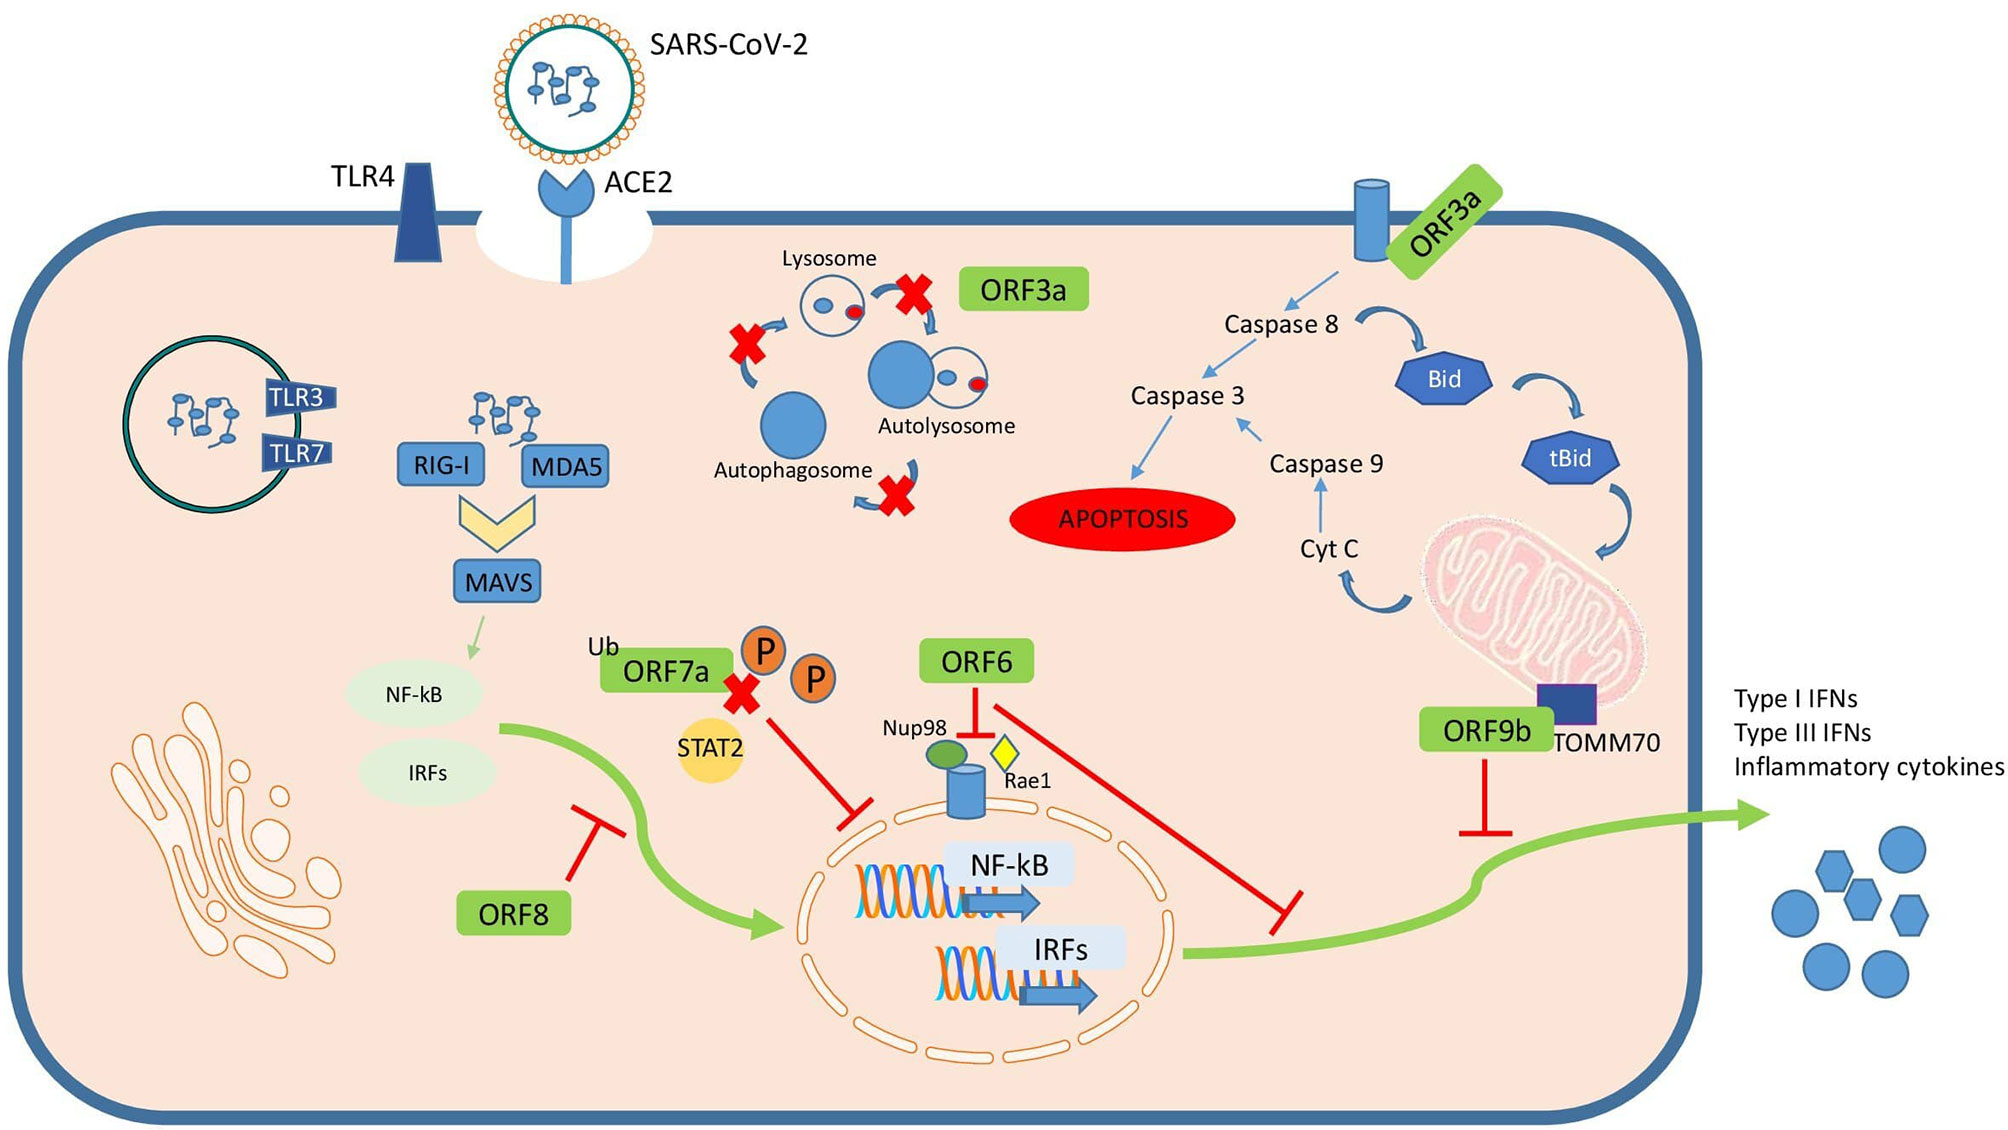 Https dois ru. Orf3a orf7a in Covid. Life circle of SARS cov 2. Pathogenesis: overcome. C17orf53 hemk2 Protein.